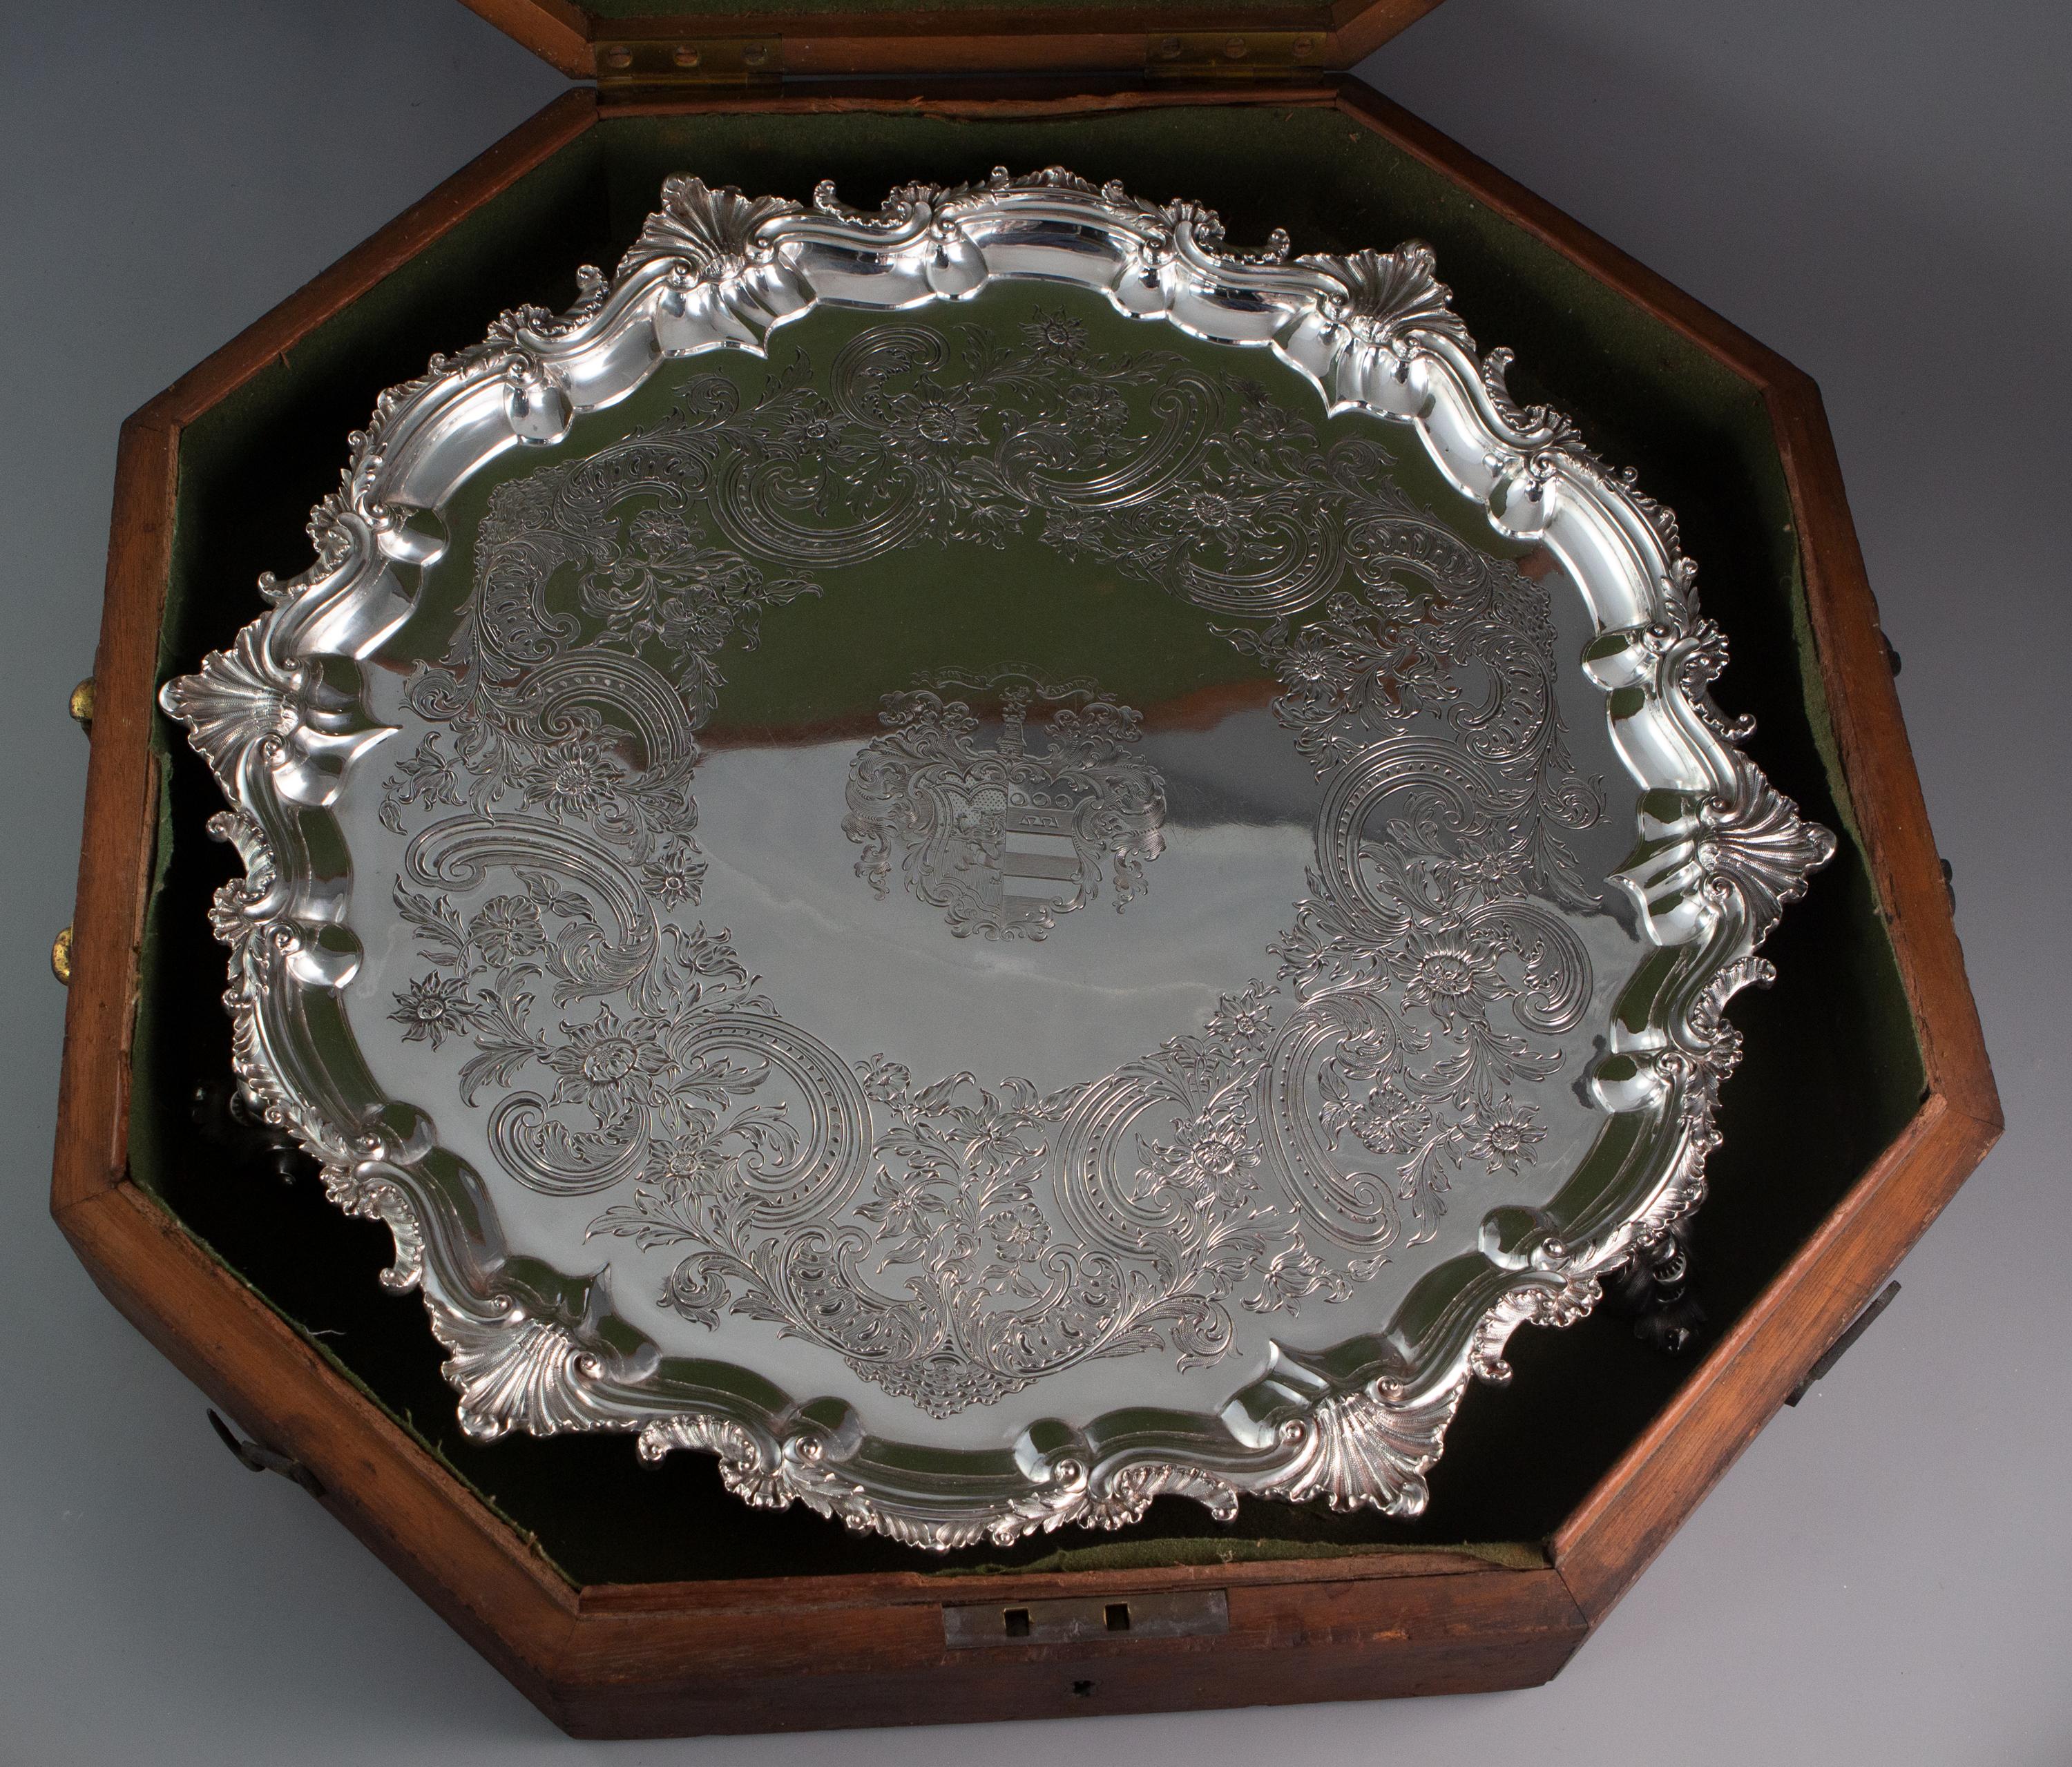 English Large Georgian Silver Salver or Tray by Paul Storr, London, 1829